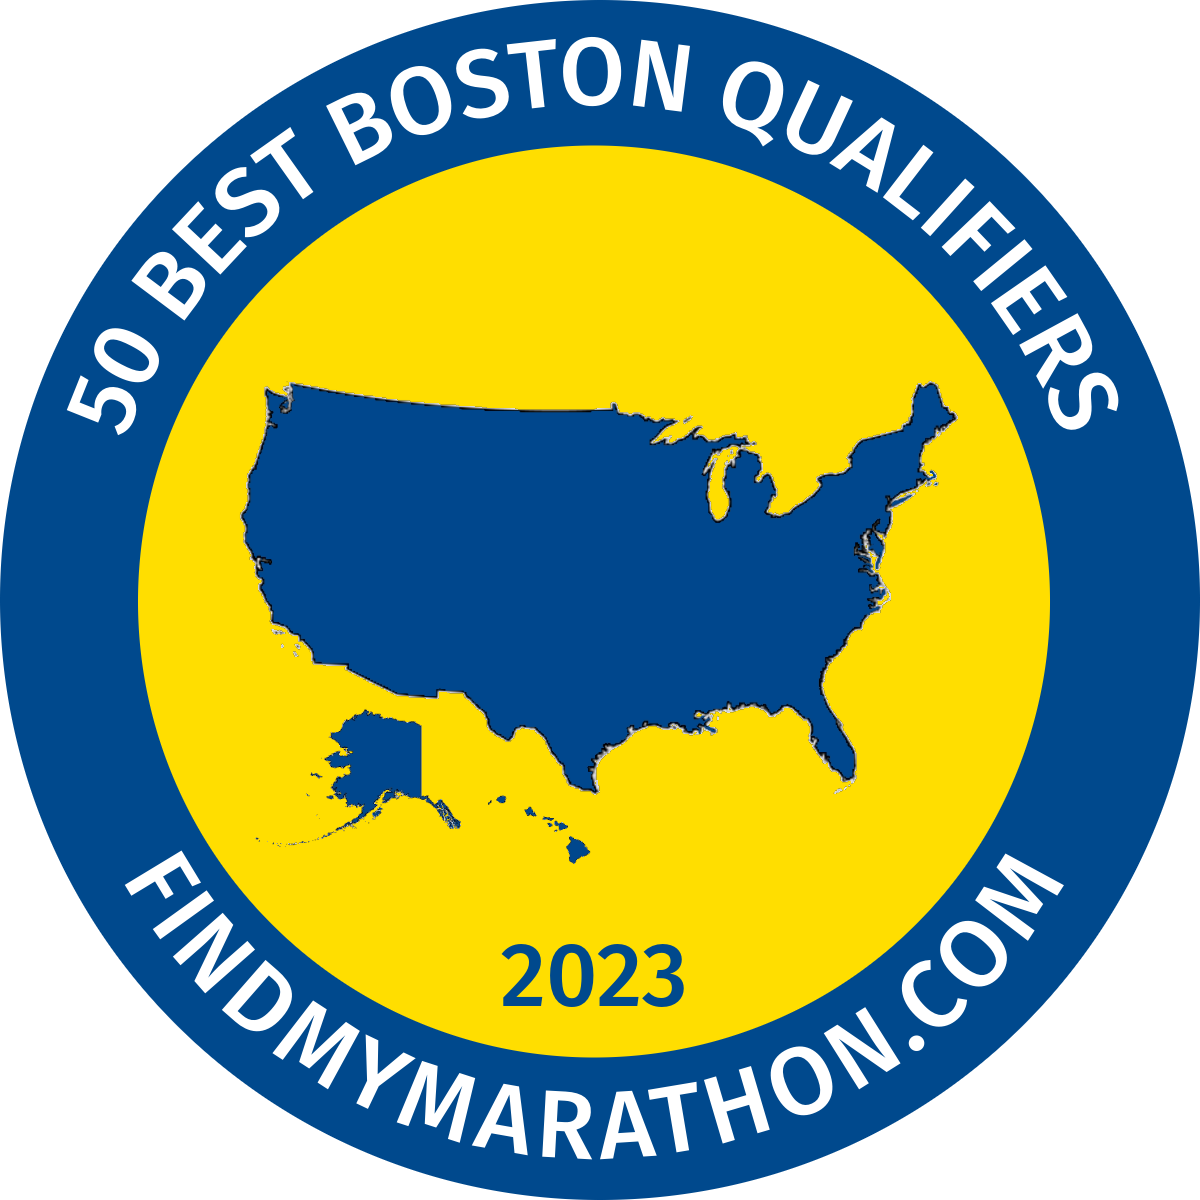 Top 50 Boston Qualifying Races for 2023